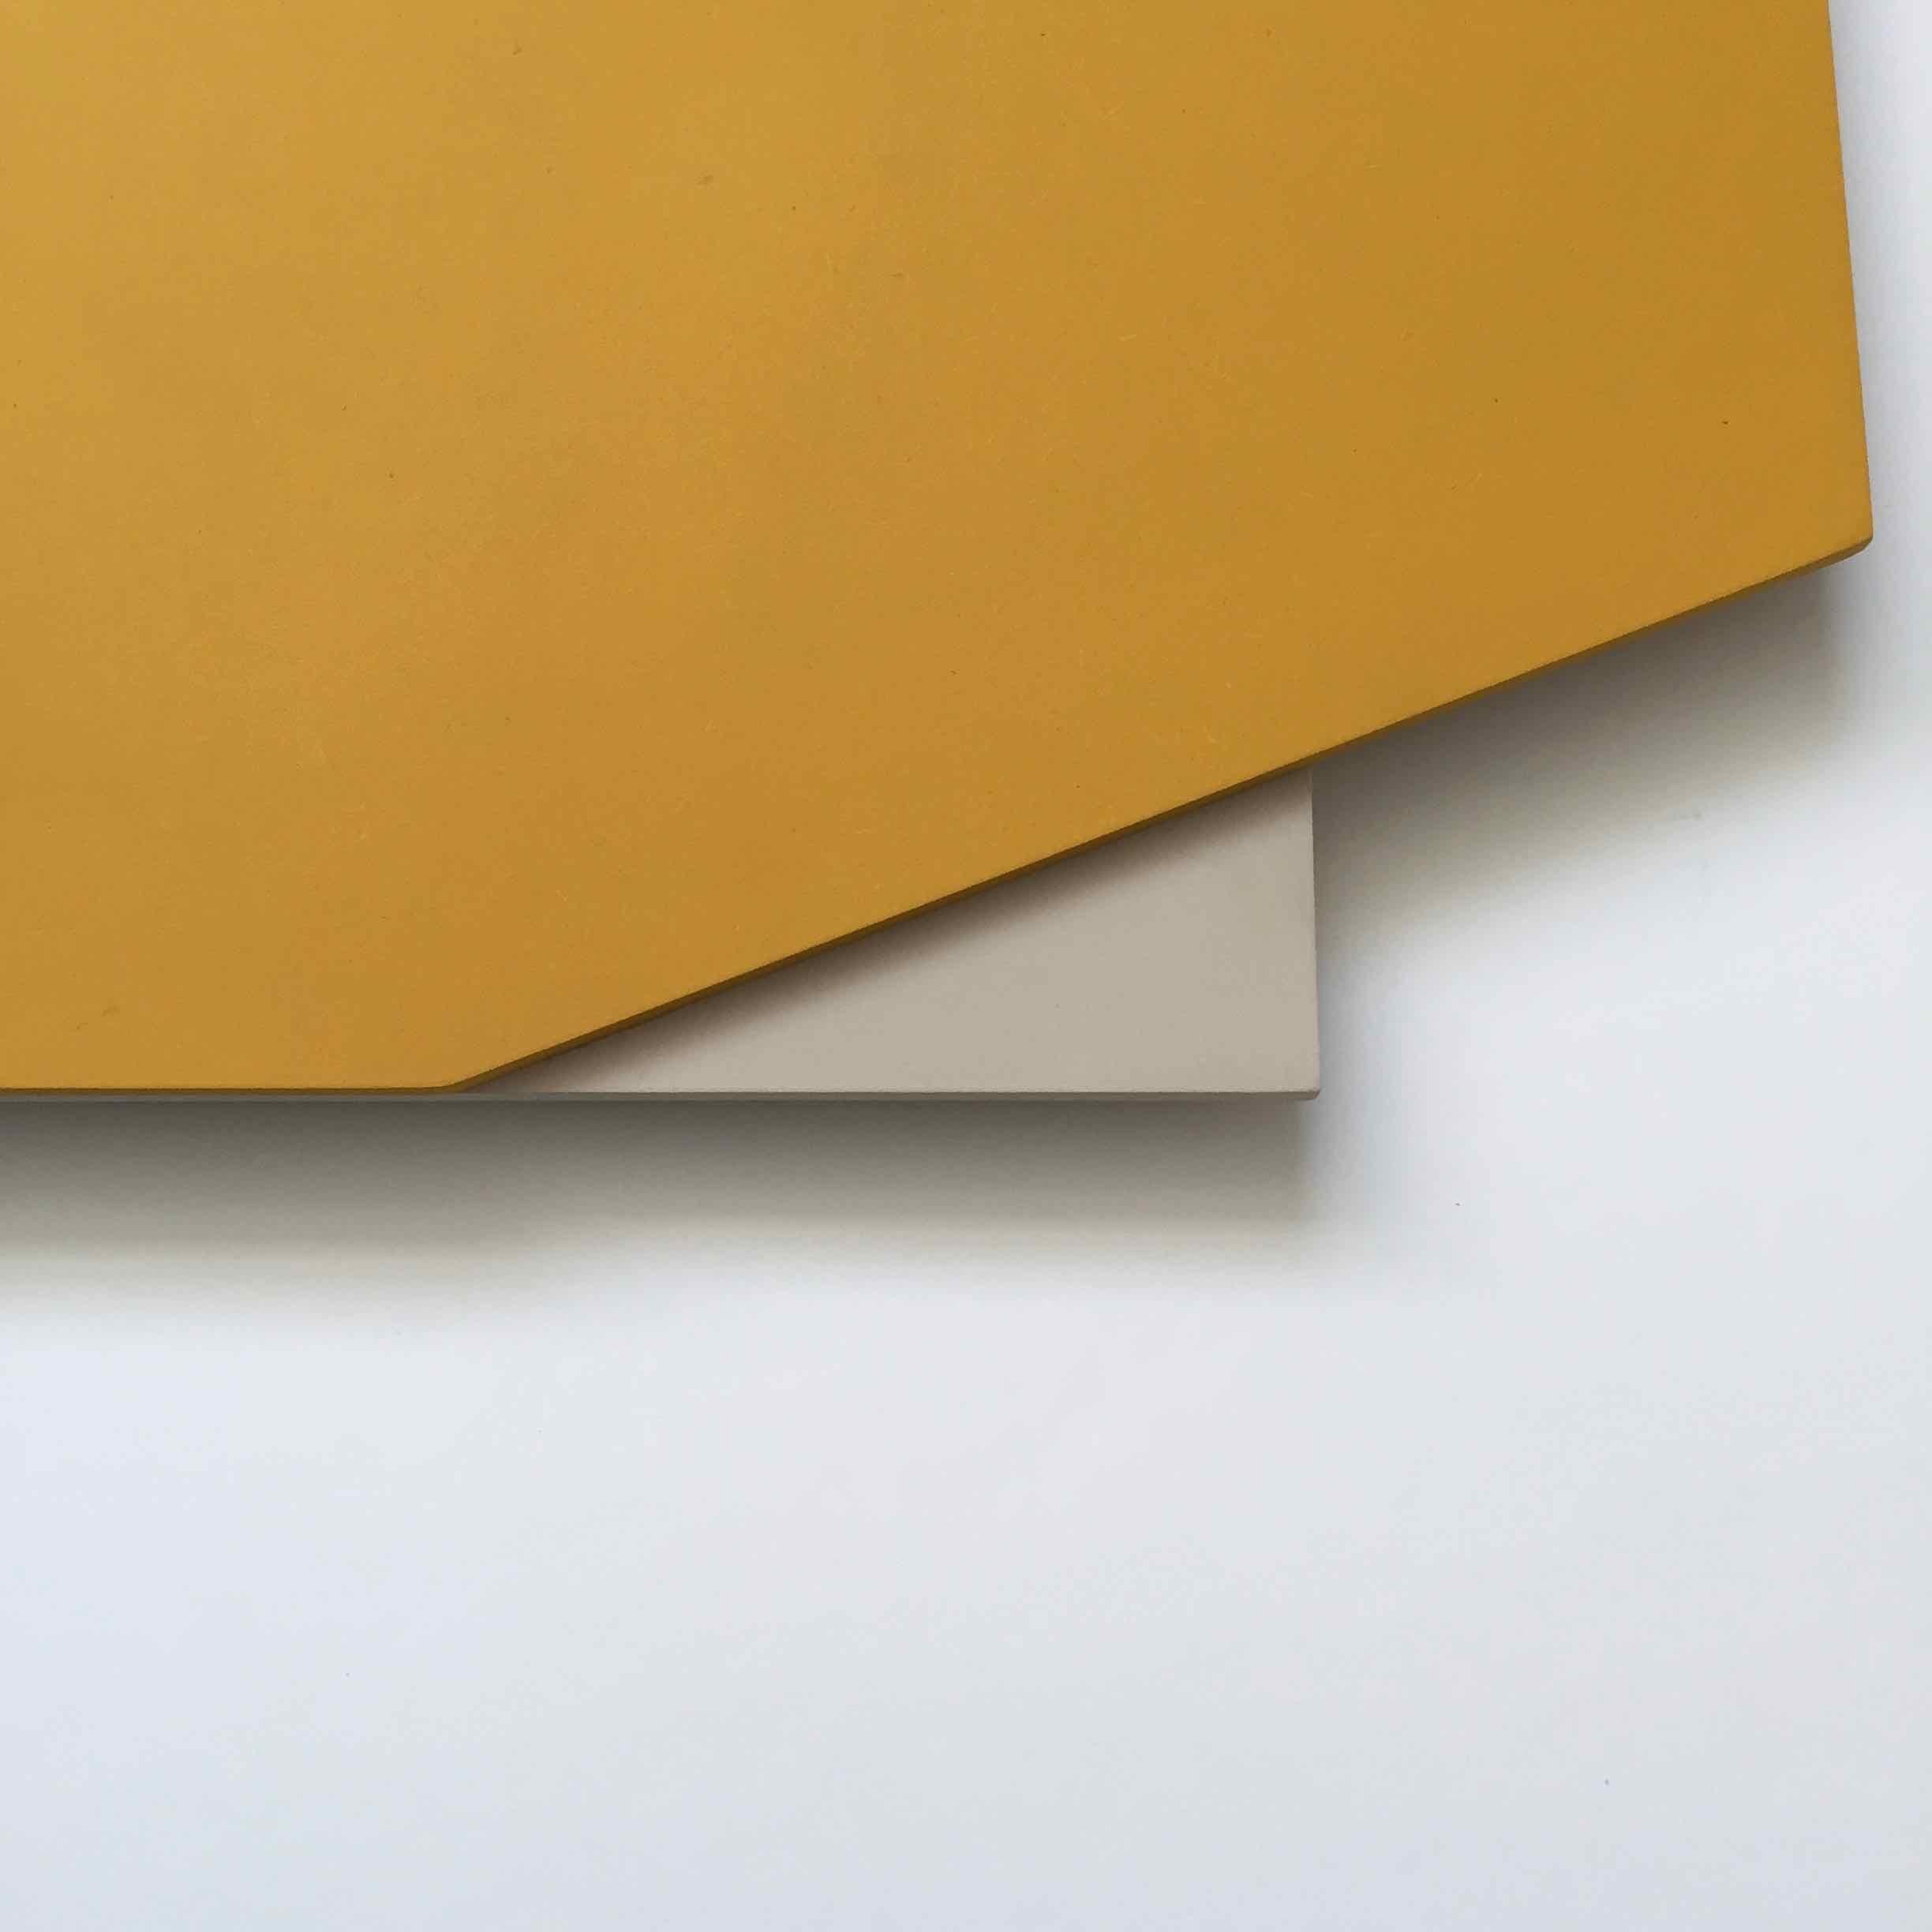 Cut Out 50 series (number 003): Minimal Hard Edge Abstract Painting Construction - Hard-Edge Sculpture by Laura Jane Scott